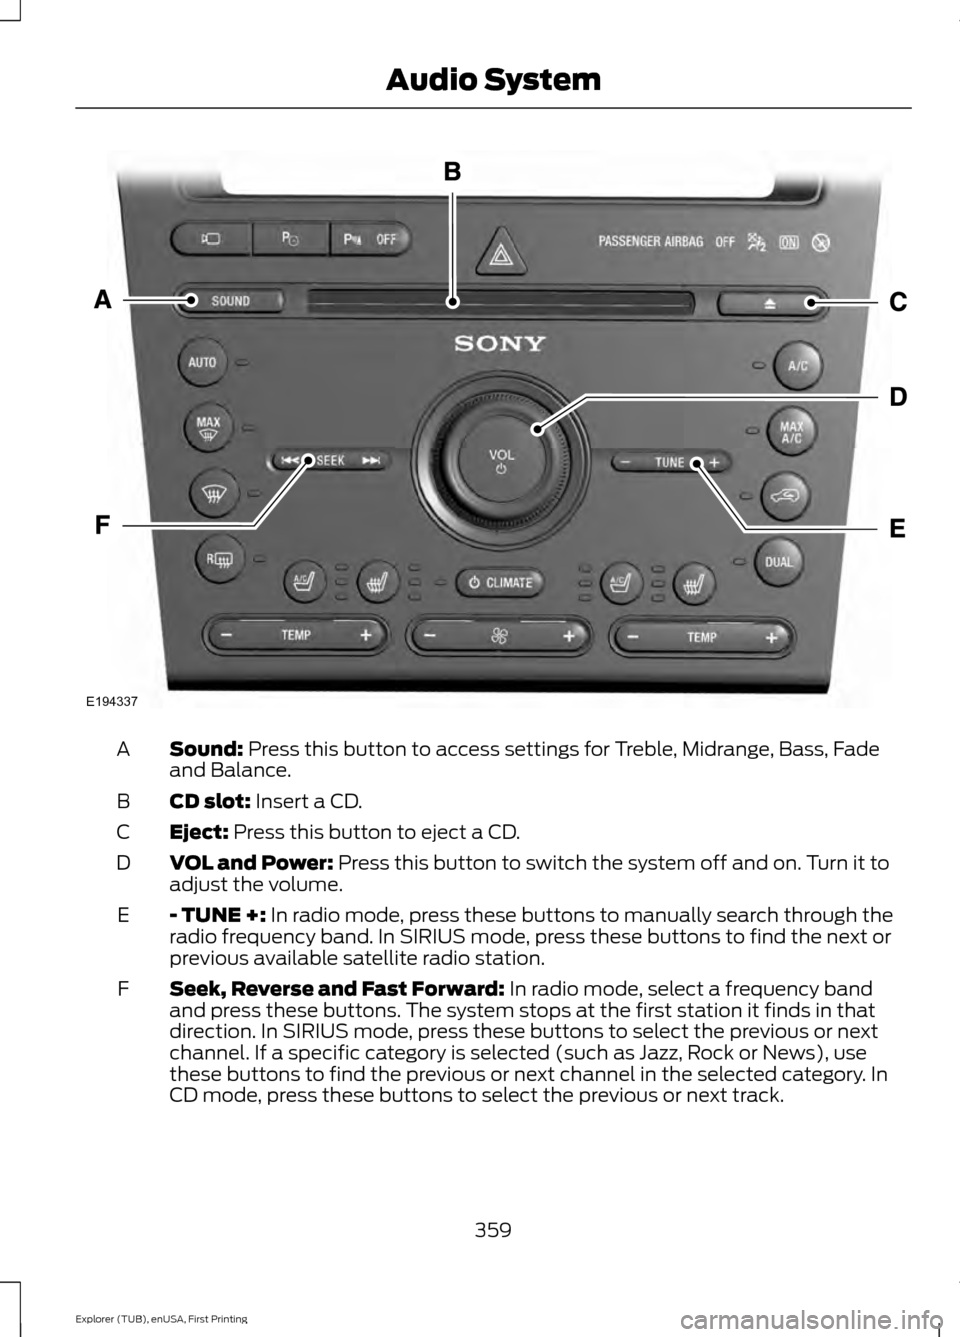 FORD EXPLORER 2016 5.G Owners Manual Sound: Press this button to access settings for Treble, Midrange, Bass, Fade
and Balance.
A
CD slot:
 Insert a CD.
B
Eject:
 Press this button to eject a CD.
C
VOL and Power:
 Press this button to swi